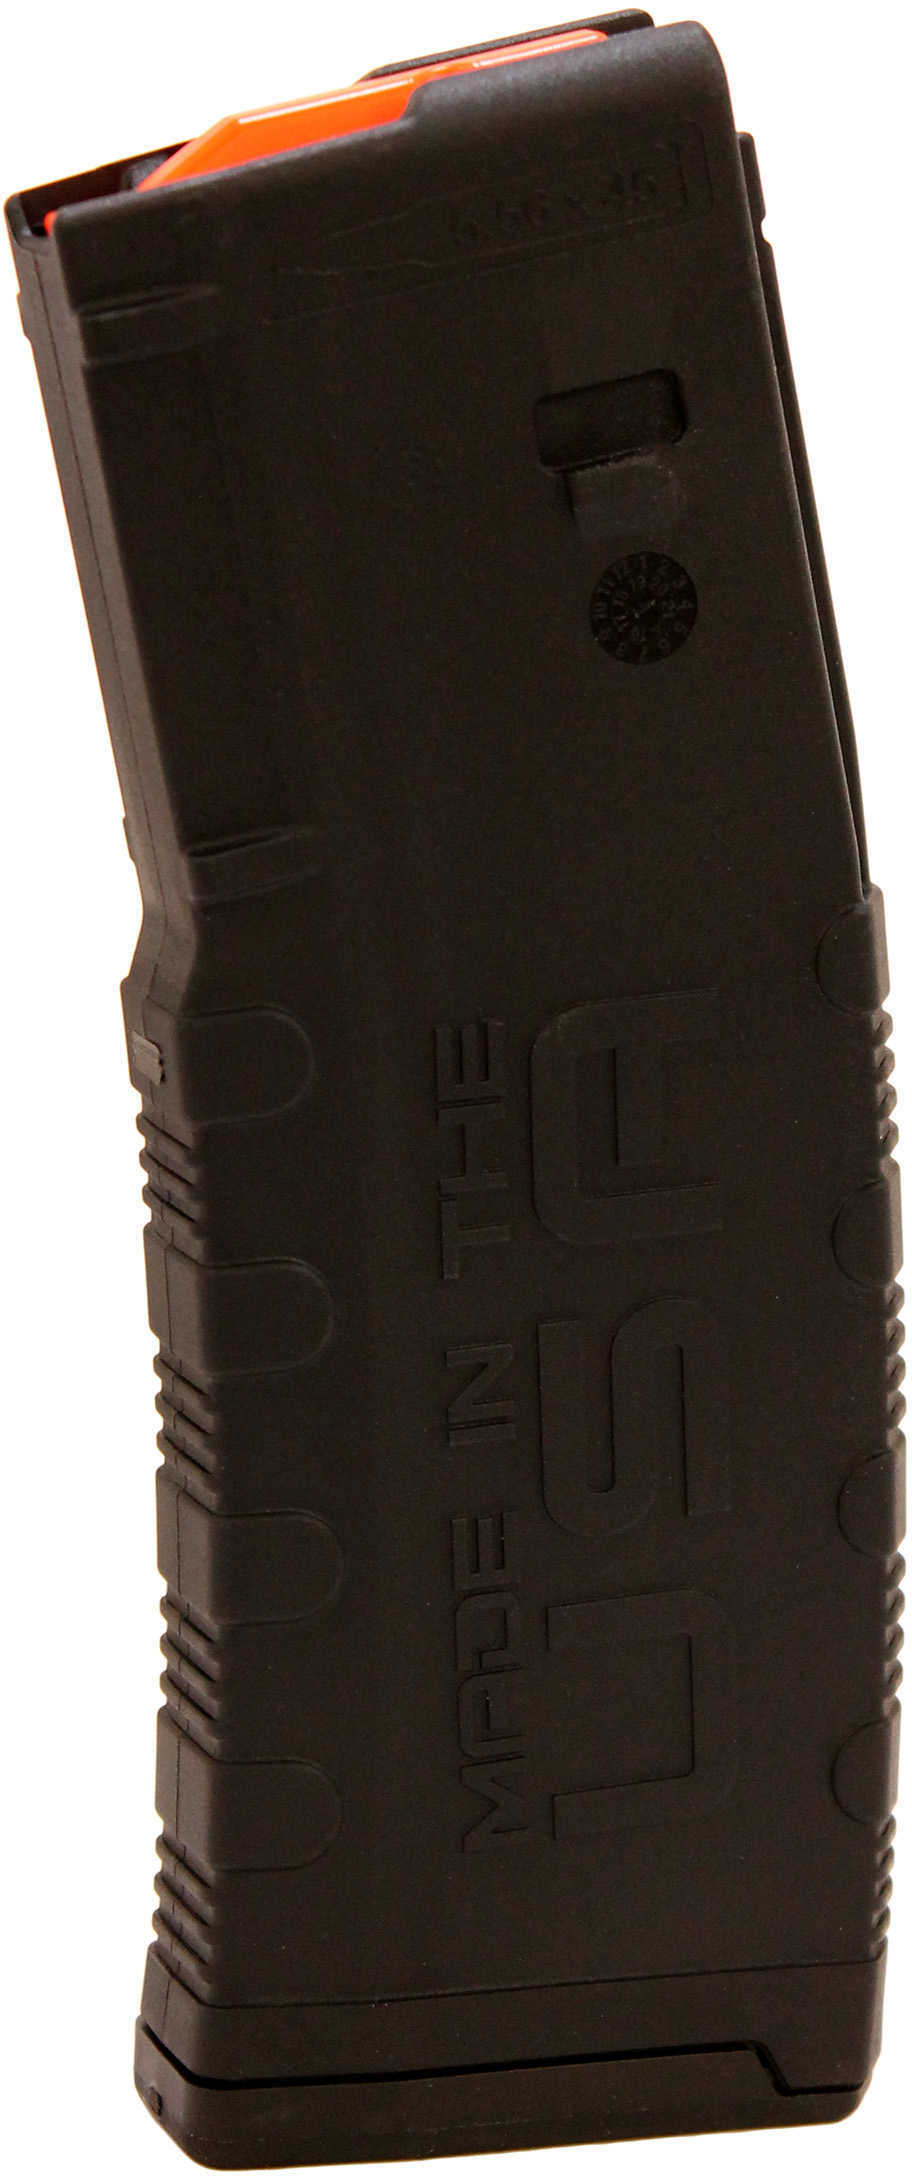 American Tactical AR-15 Magazine Amend2 .300 AAC Blackout 30 Rounds Md: ATIMAM2B30